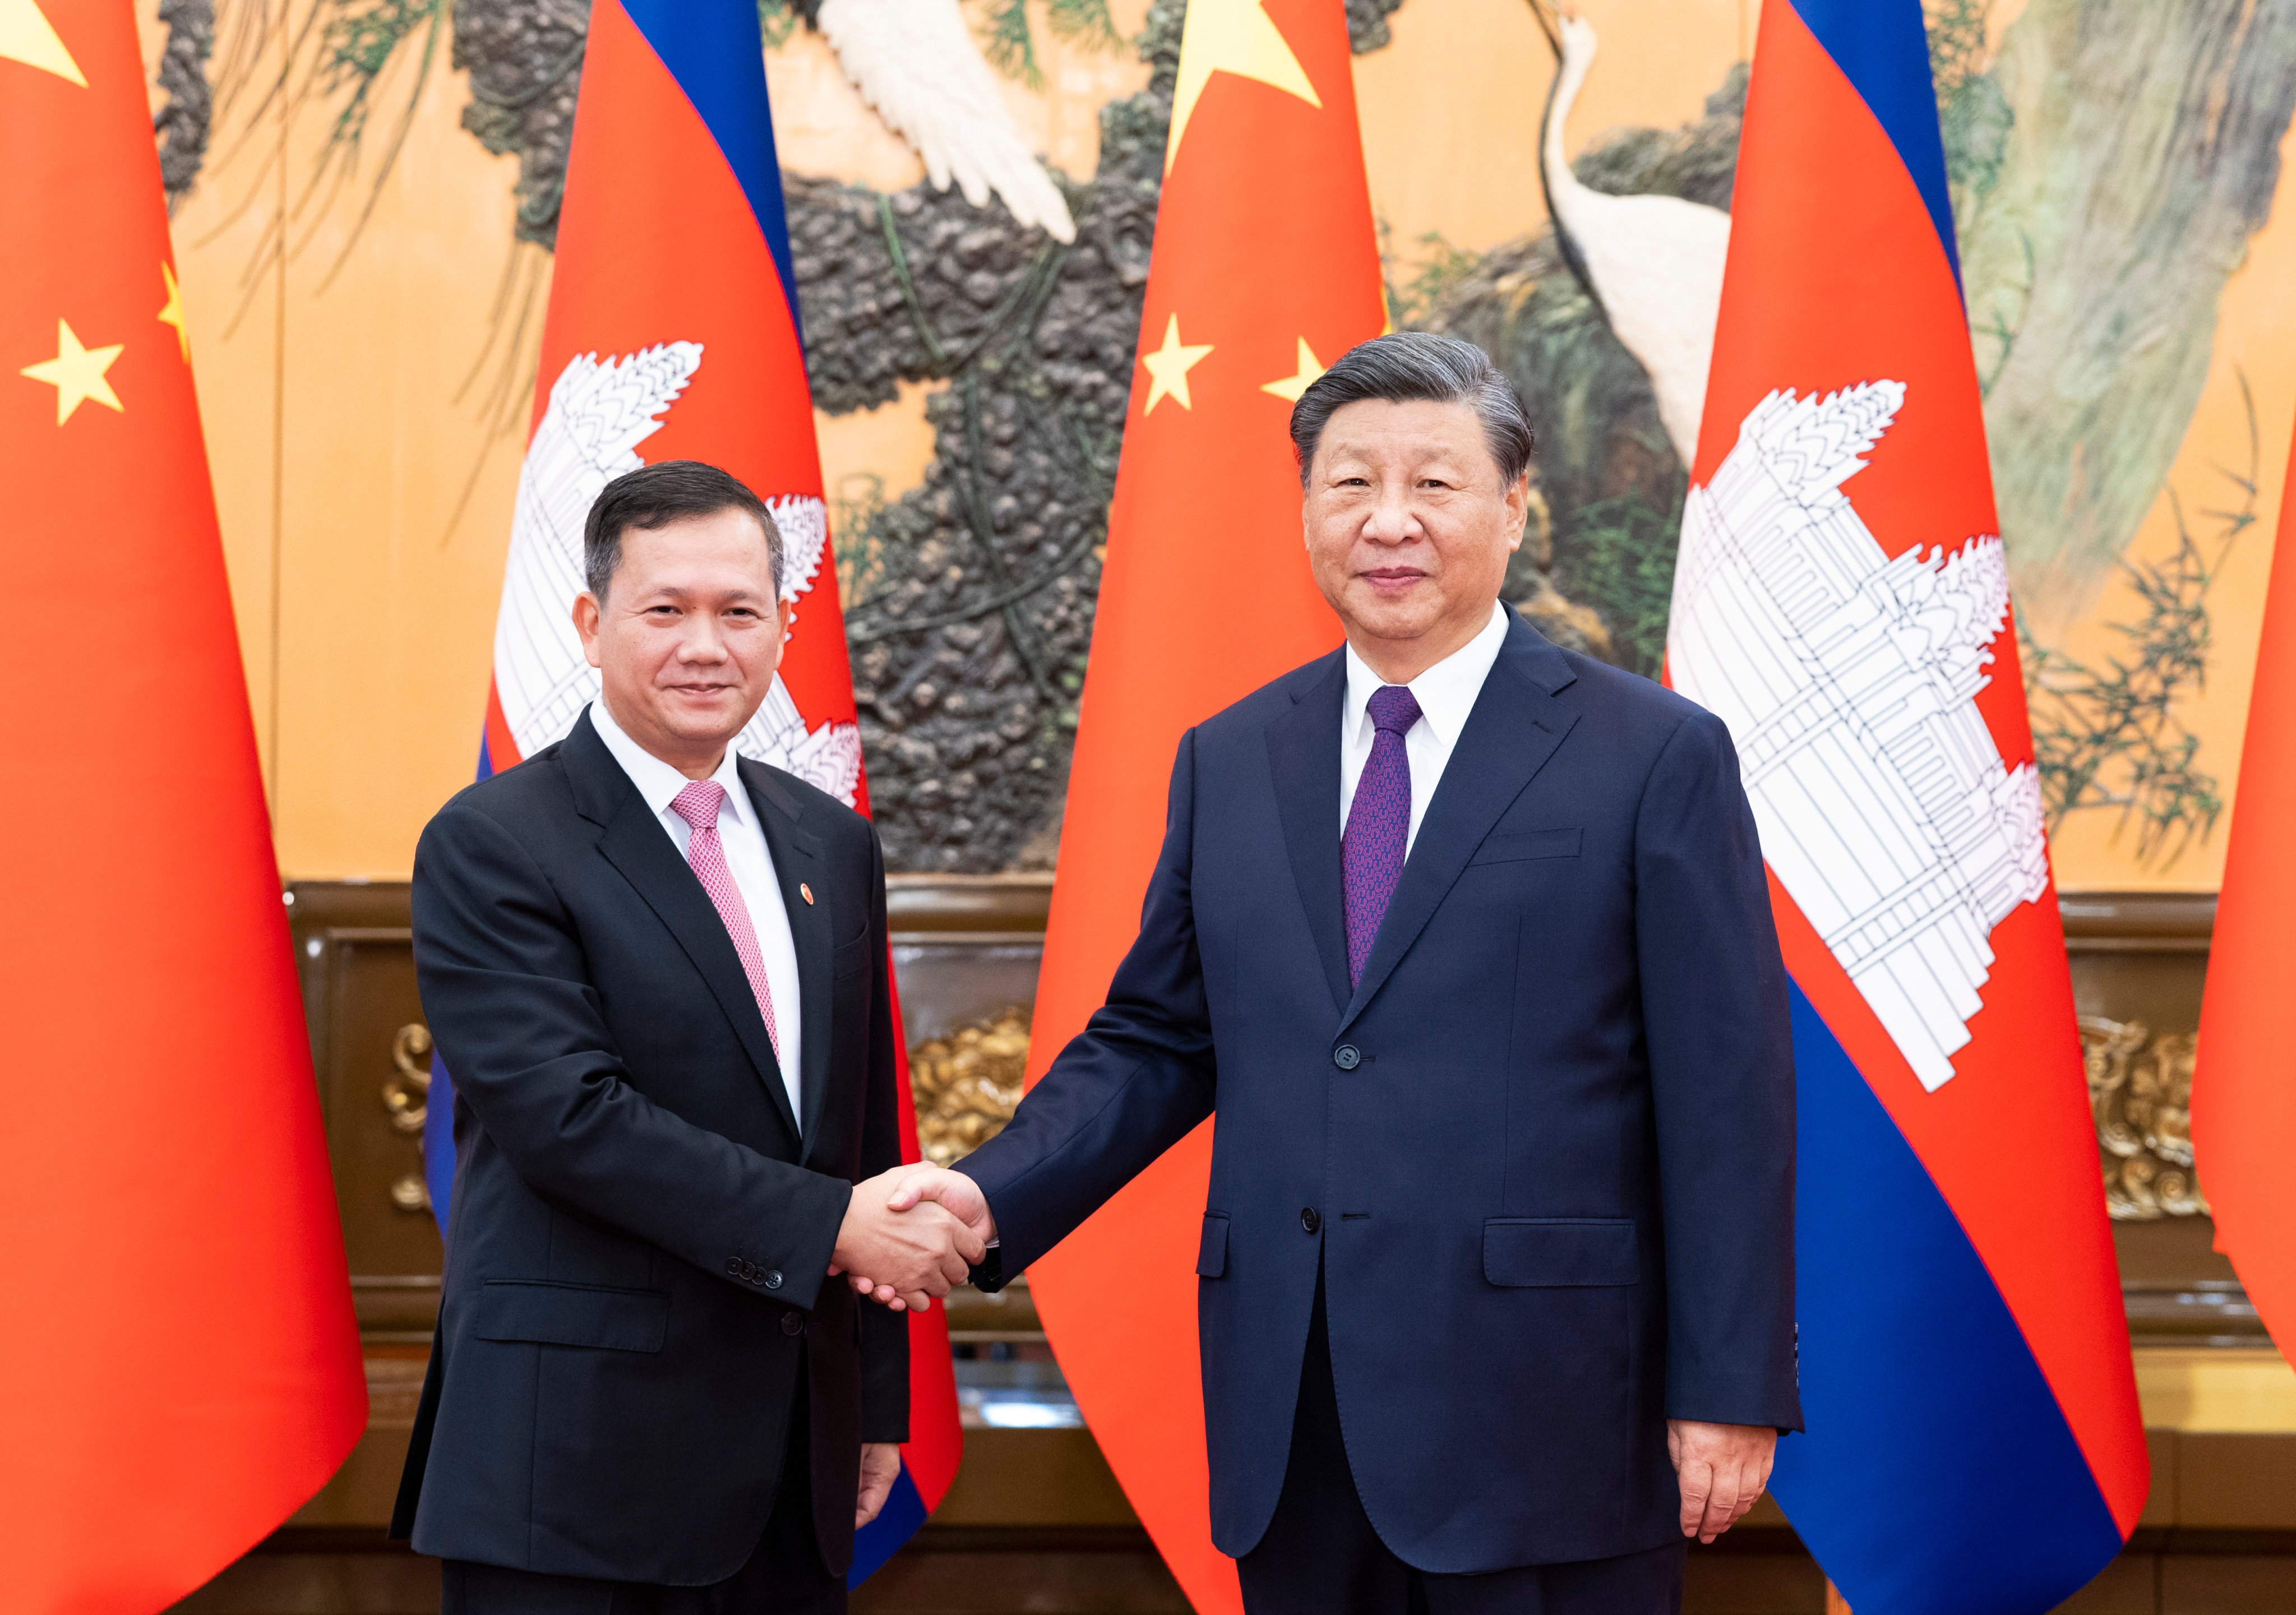 Cambodian Prime Minister Hun Manet (left) shakes hands with Chinese President Xi Jinping during a welcome ceremony in Beijing on Friday. Photo: Xinhua